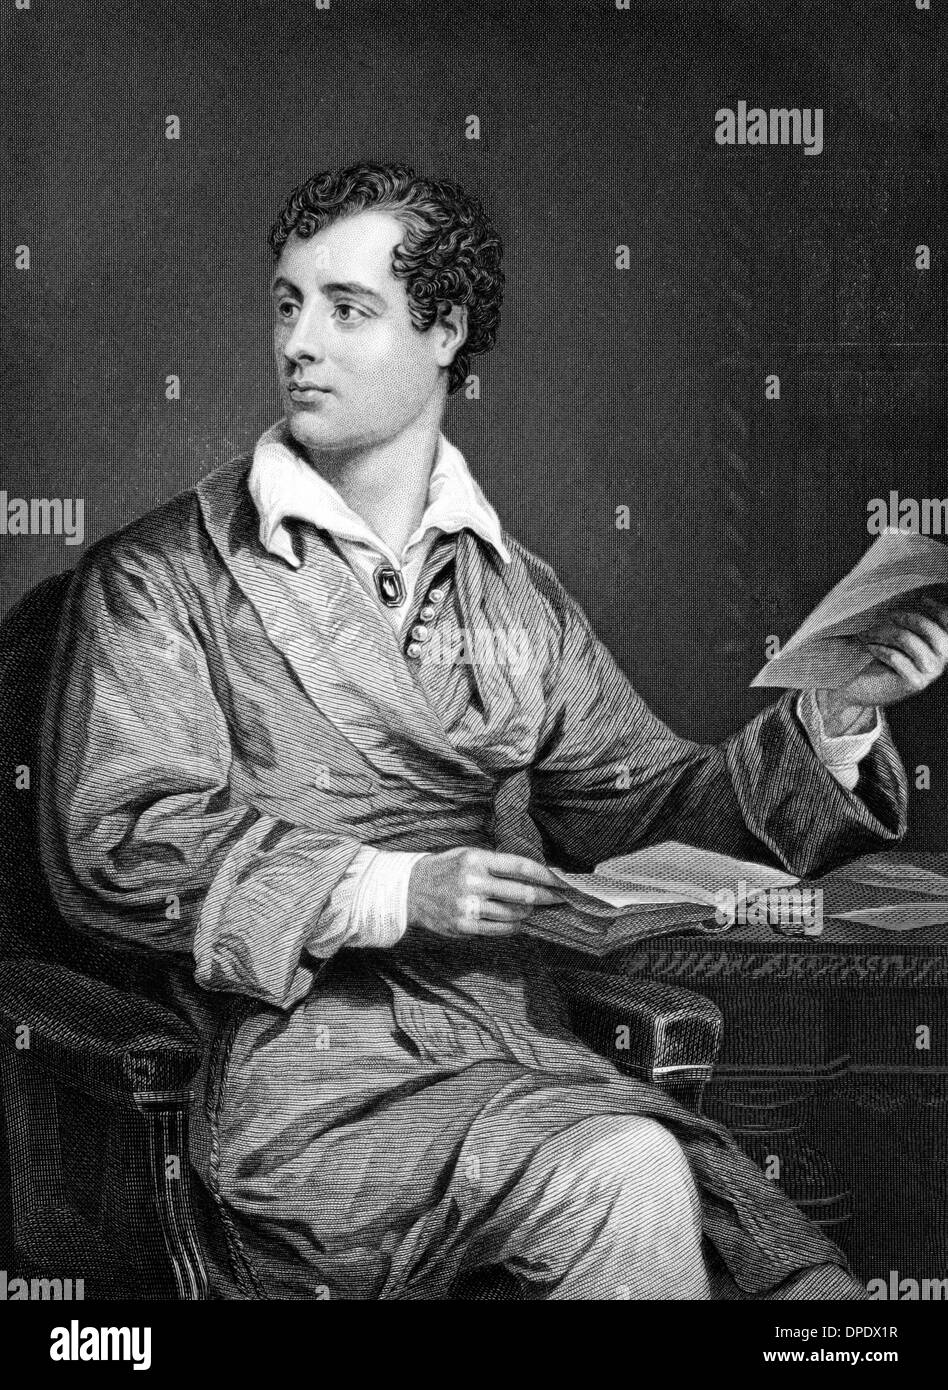 Lord Byron (1788-1824) on engraving from 1873. British poet and leading figures in the Greek war of independence. Stock Photo